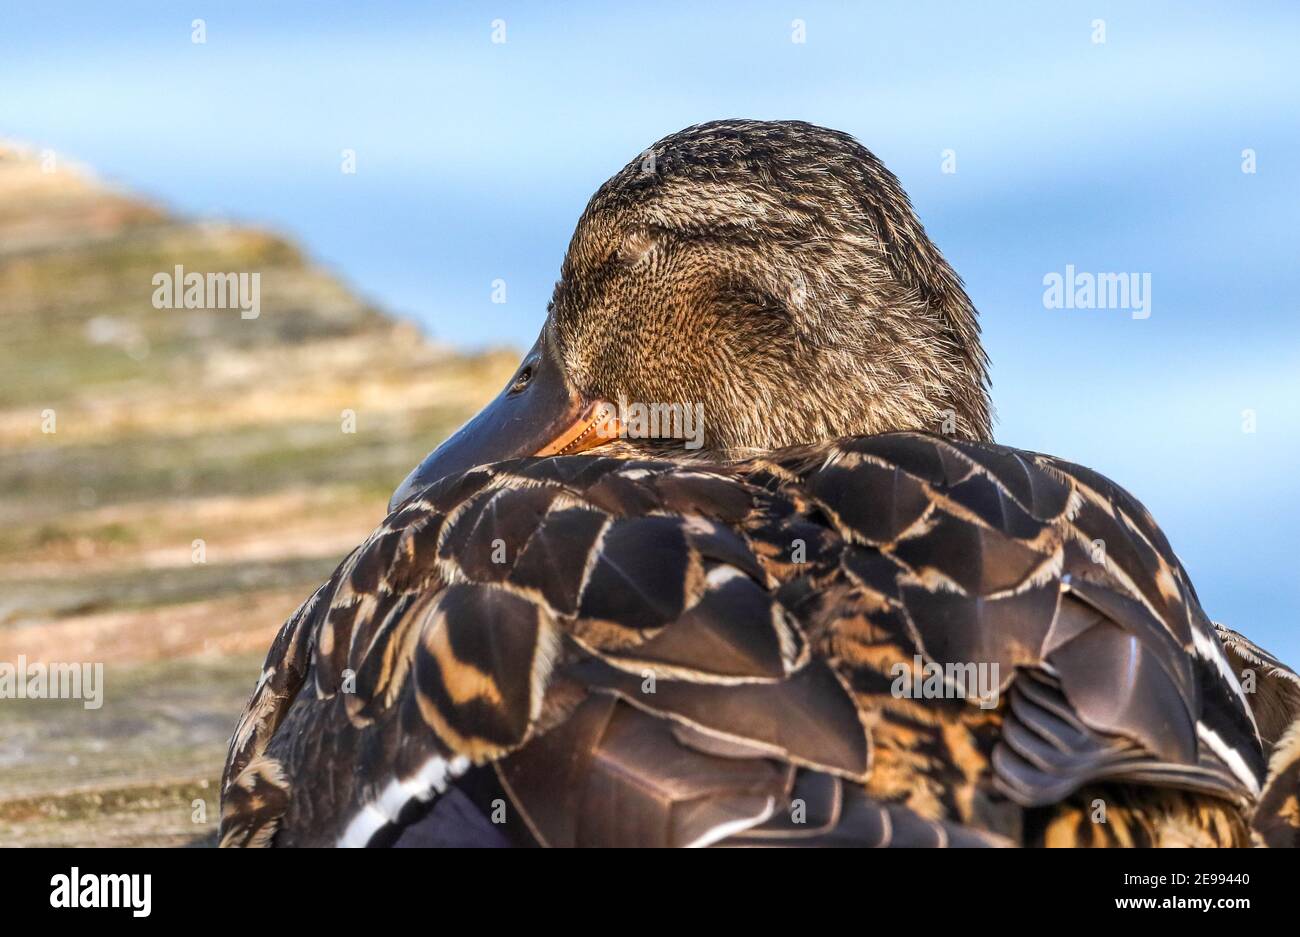 Wake me up when it's all over! Sleeping duck on a jetty. Stock Photo